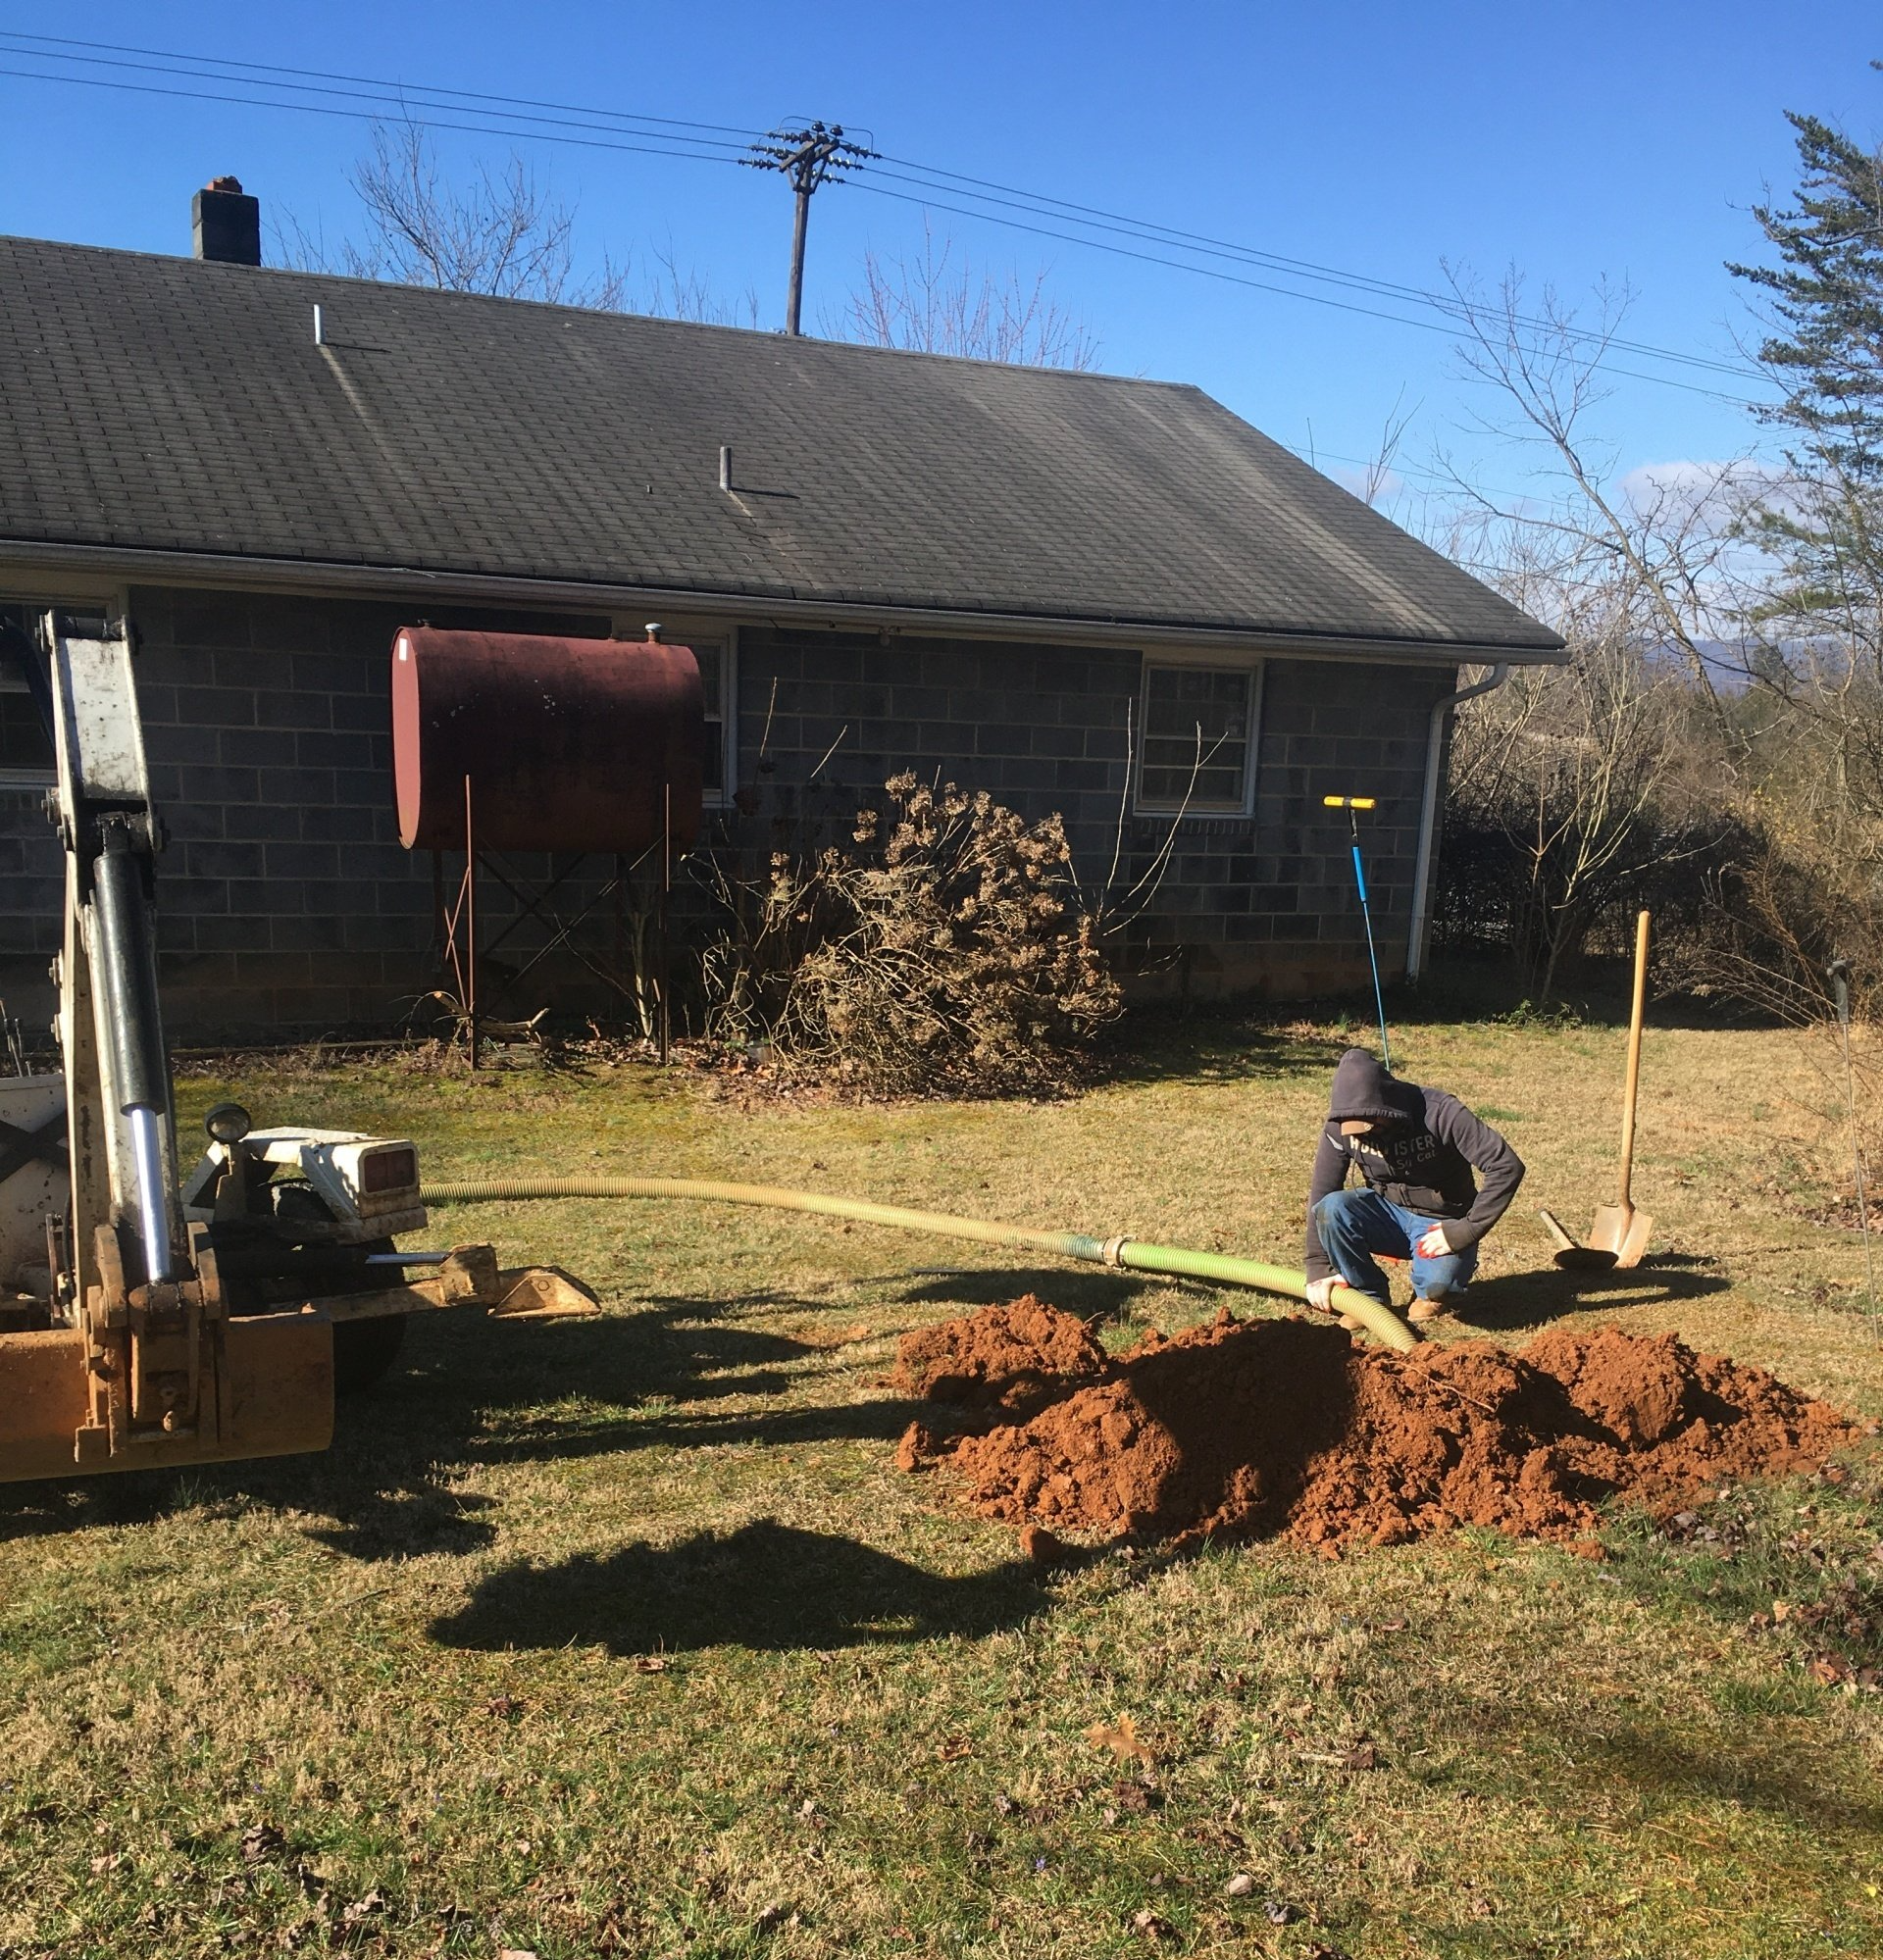 V & S Truck — Mount Airy, NC — V & S Septic Service